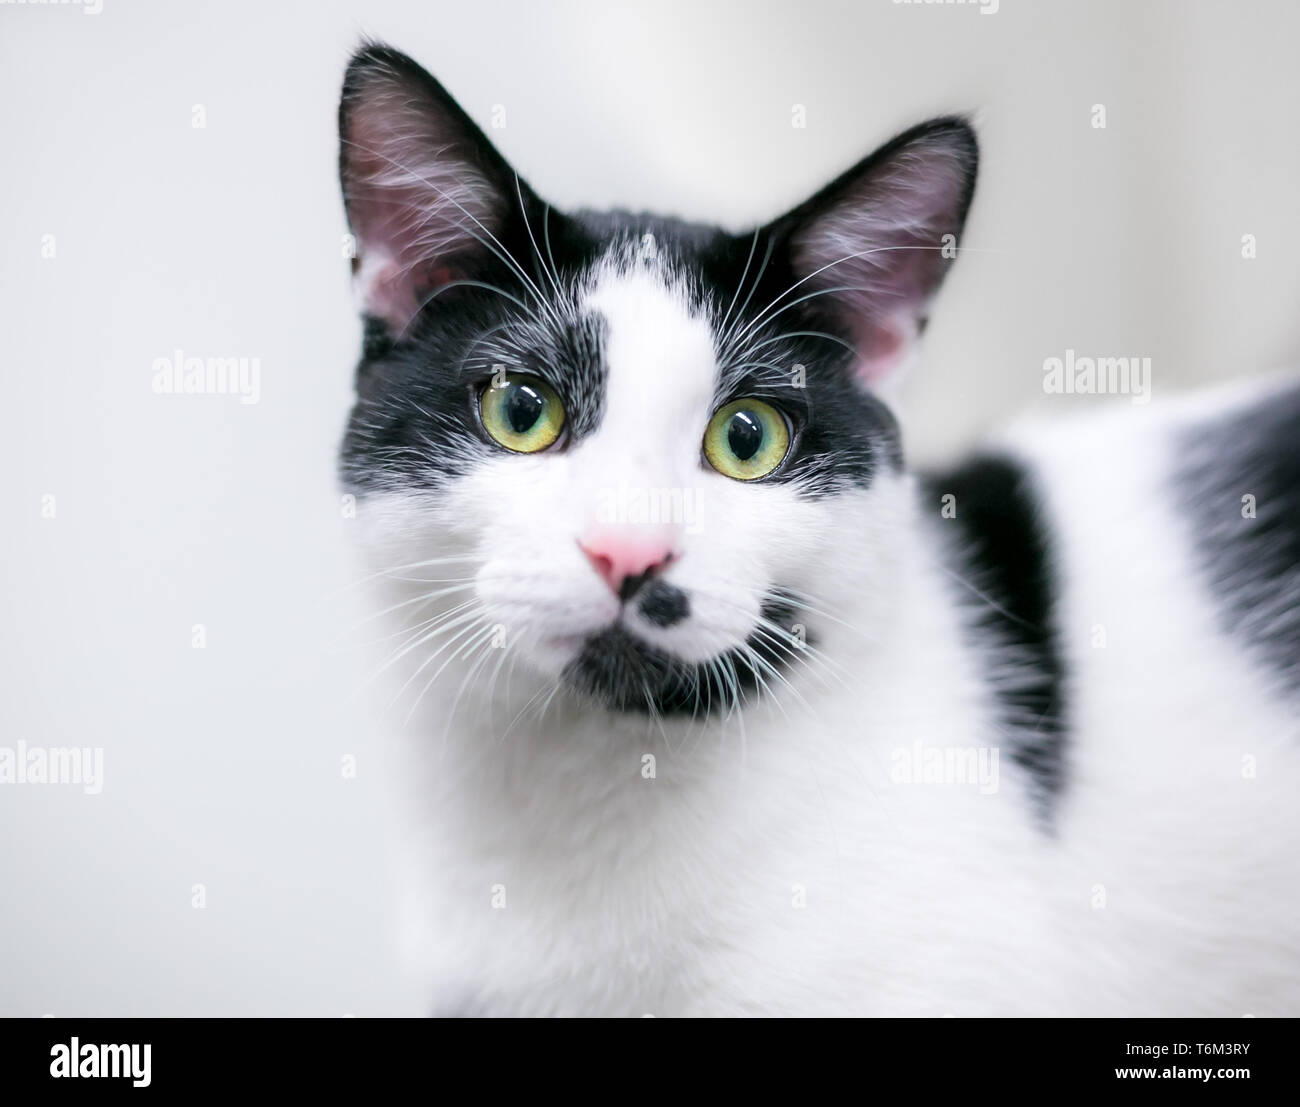 A black and white domestic shorthair cat with green eyes Stock Photo